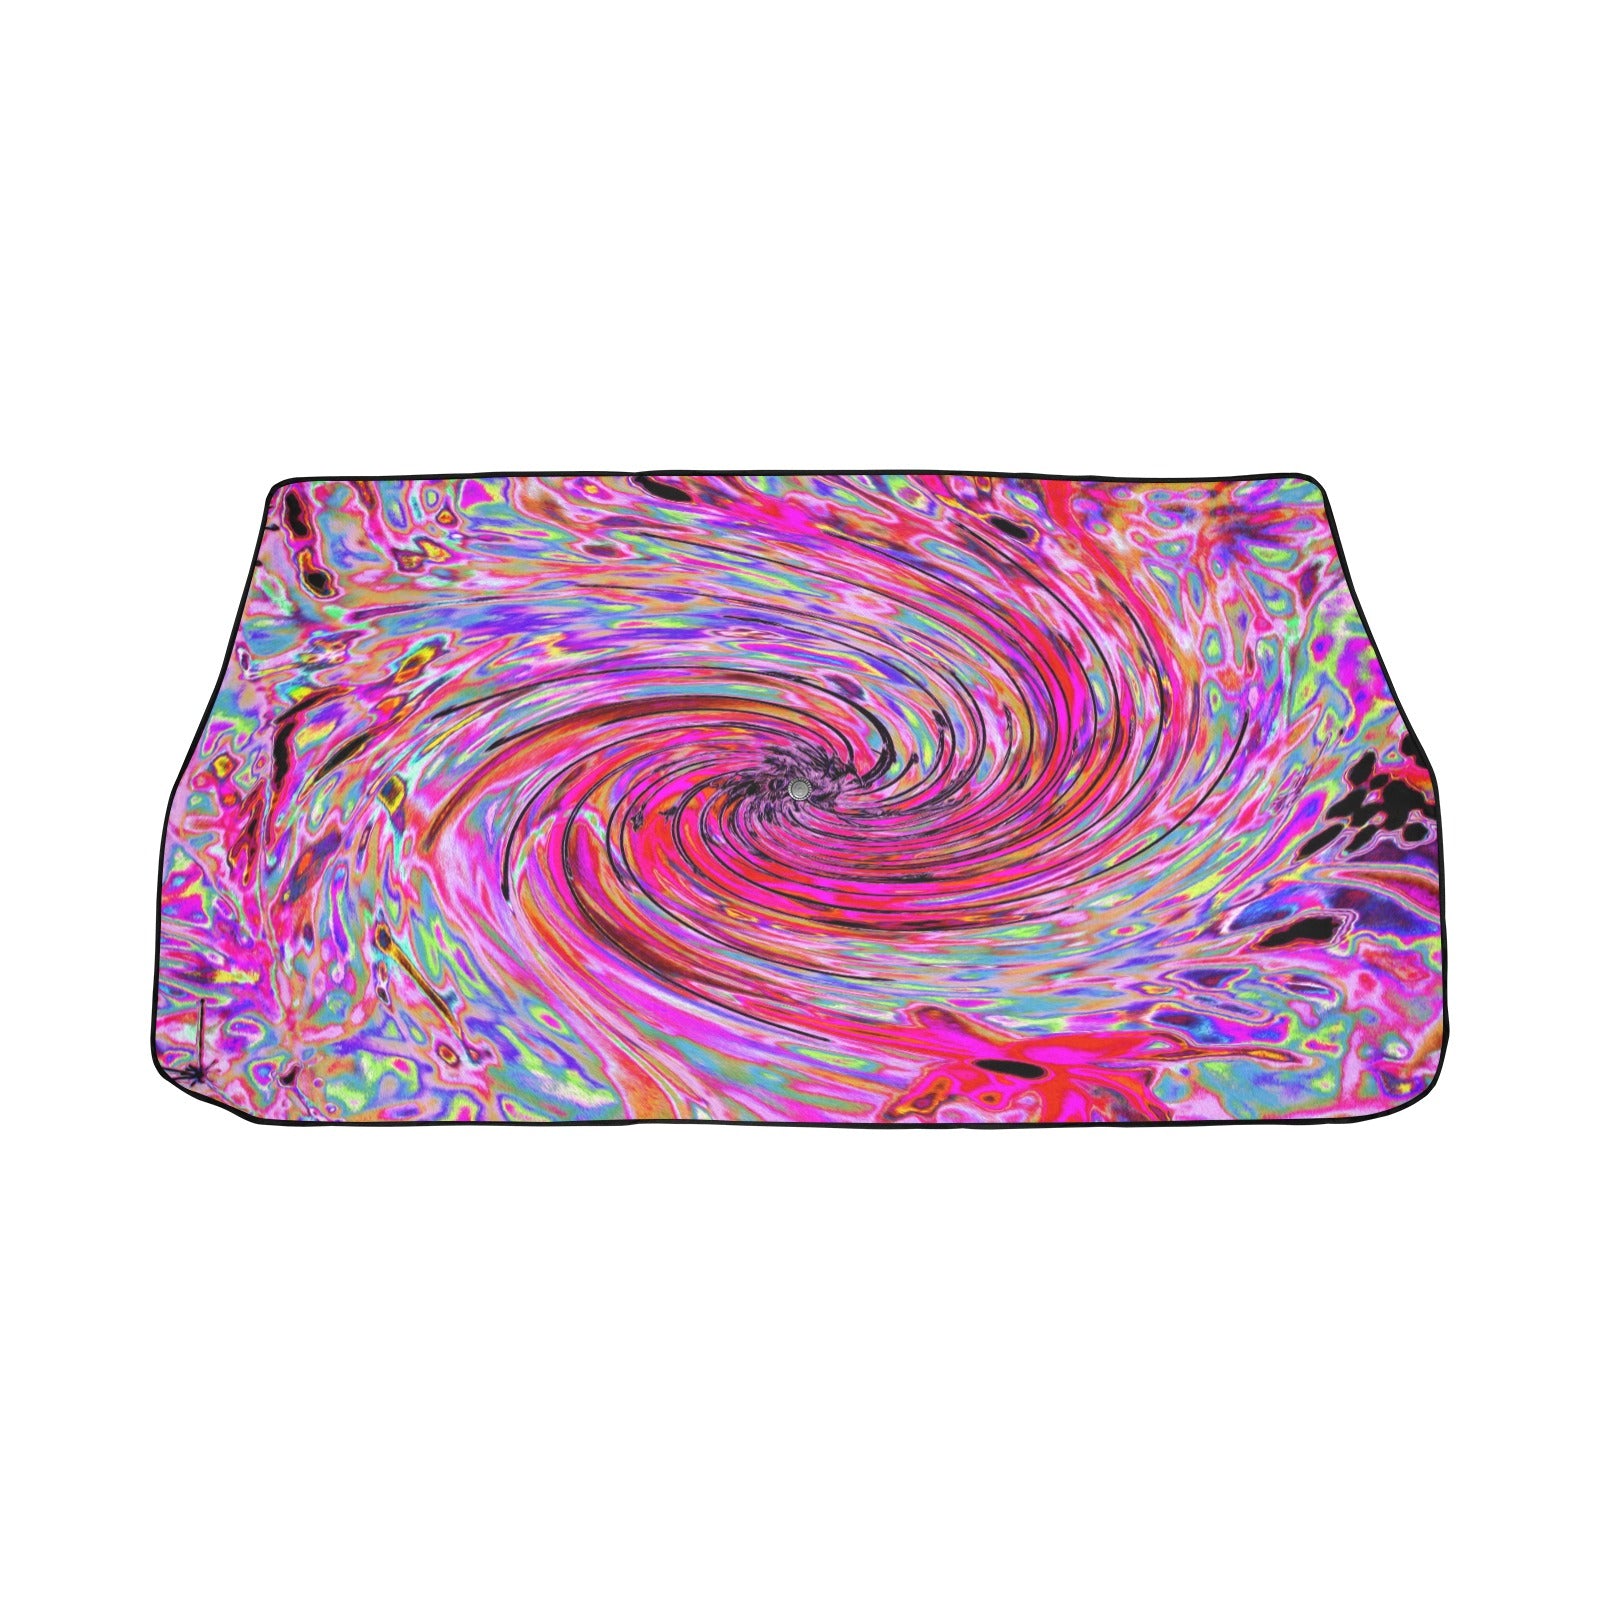 Car Umbrella Sunshades, Cool Abstract Retro Hot Pink and Red Floral Swirl